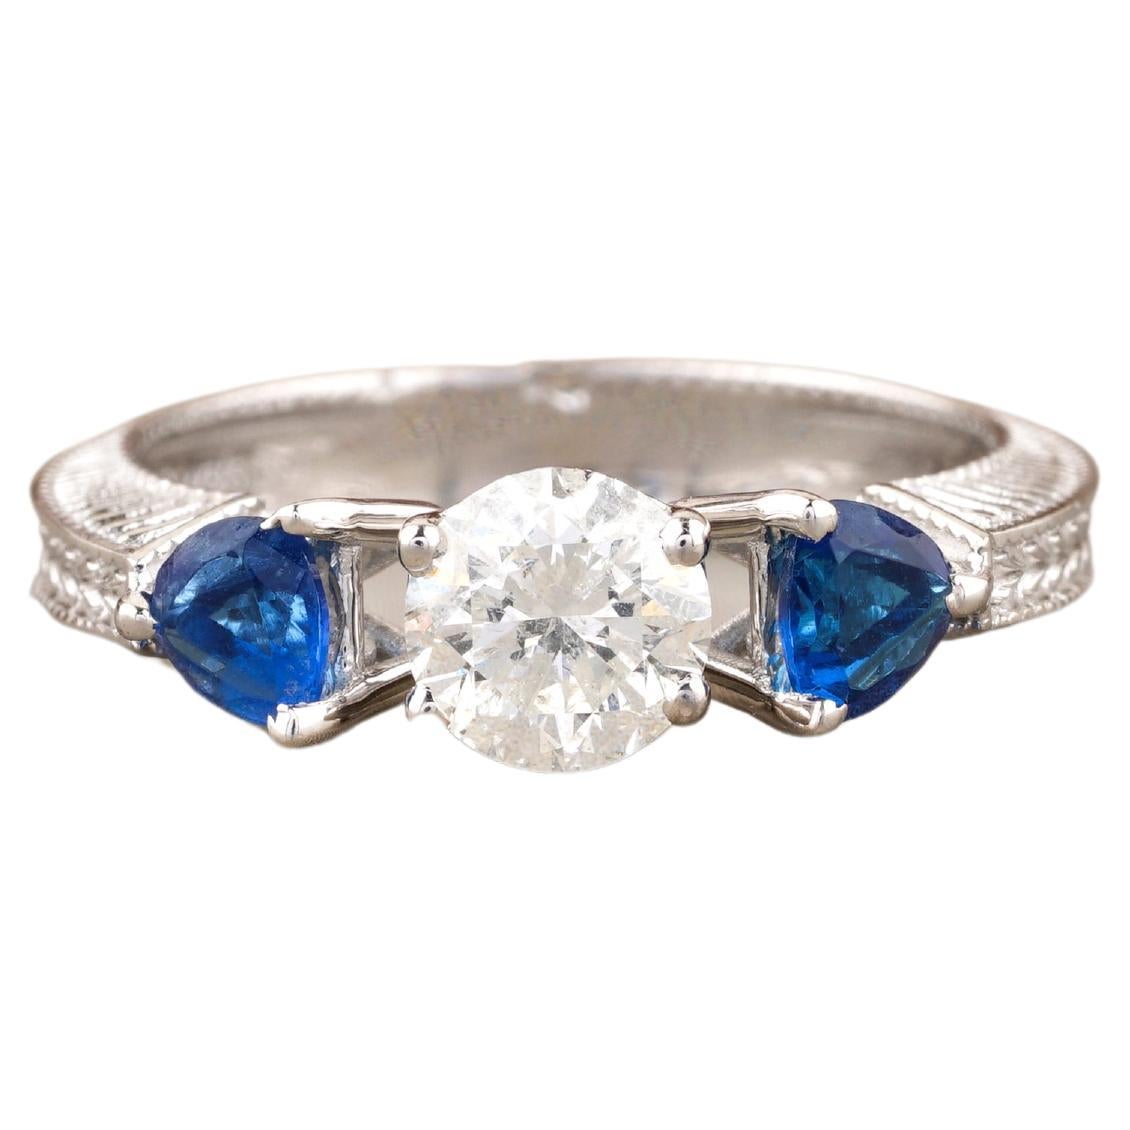 For Sale:  1 Carat Solitaire Diamond Ring with Blue Sapphires in 18k Solid Gold